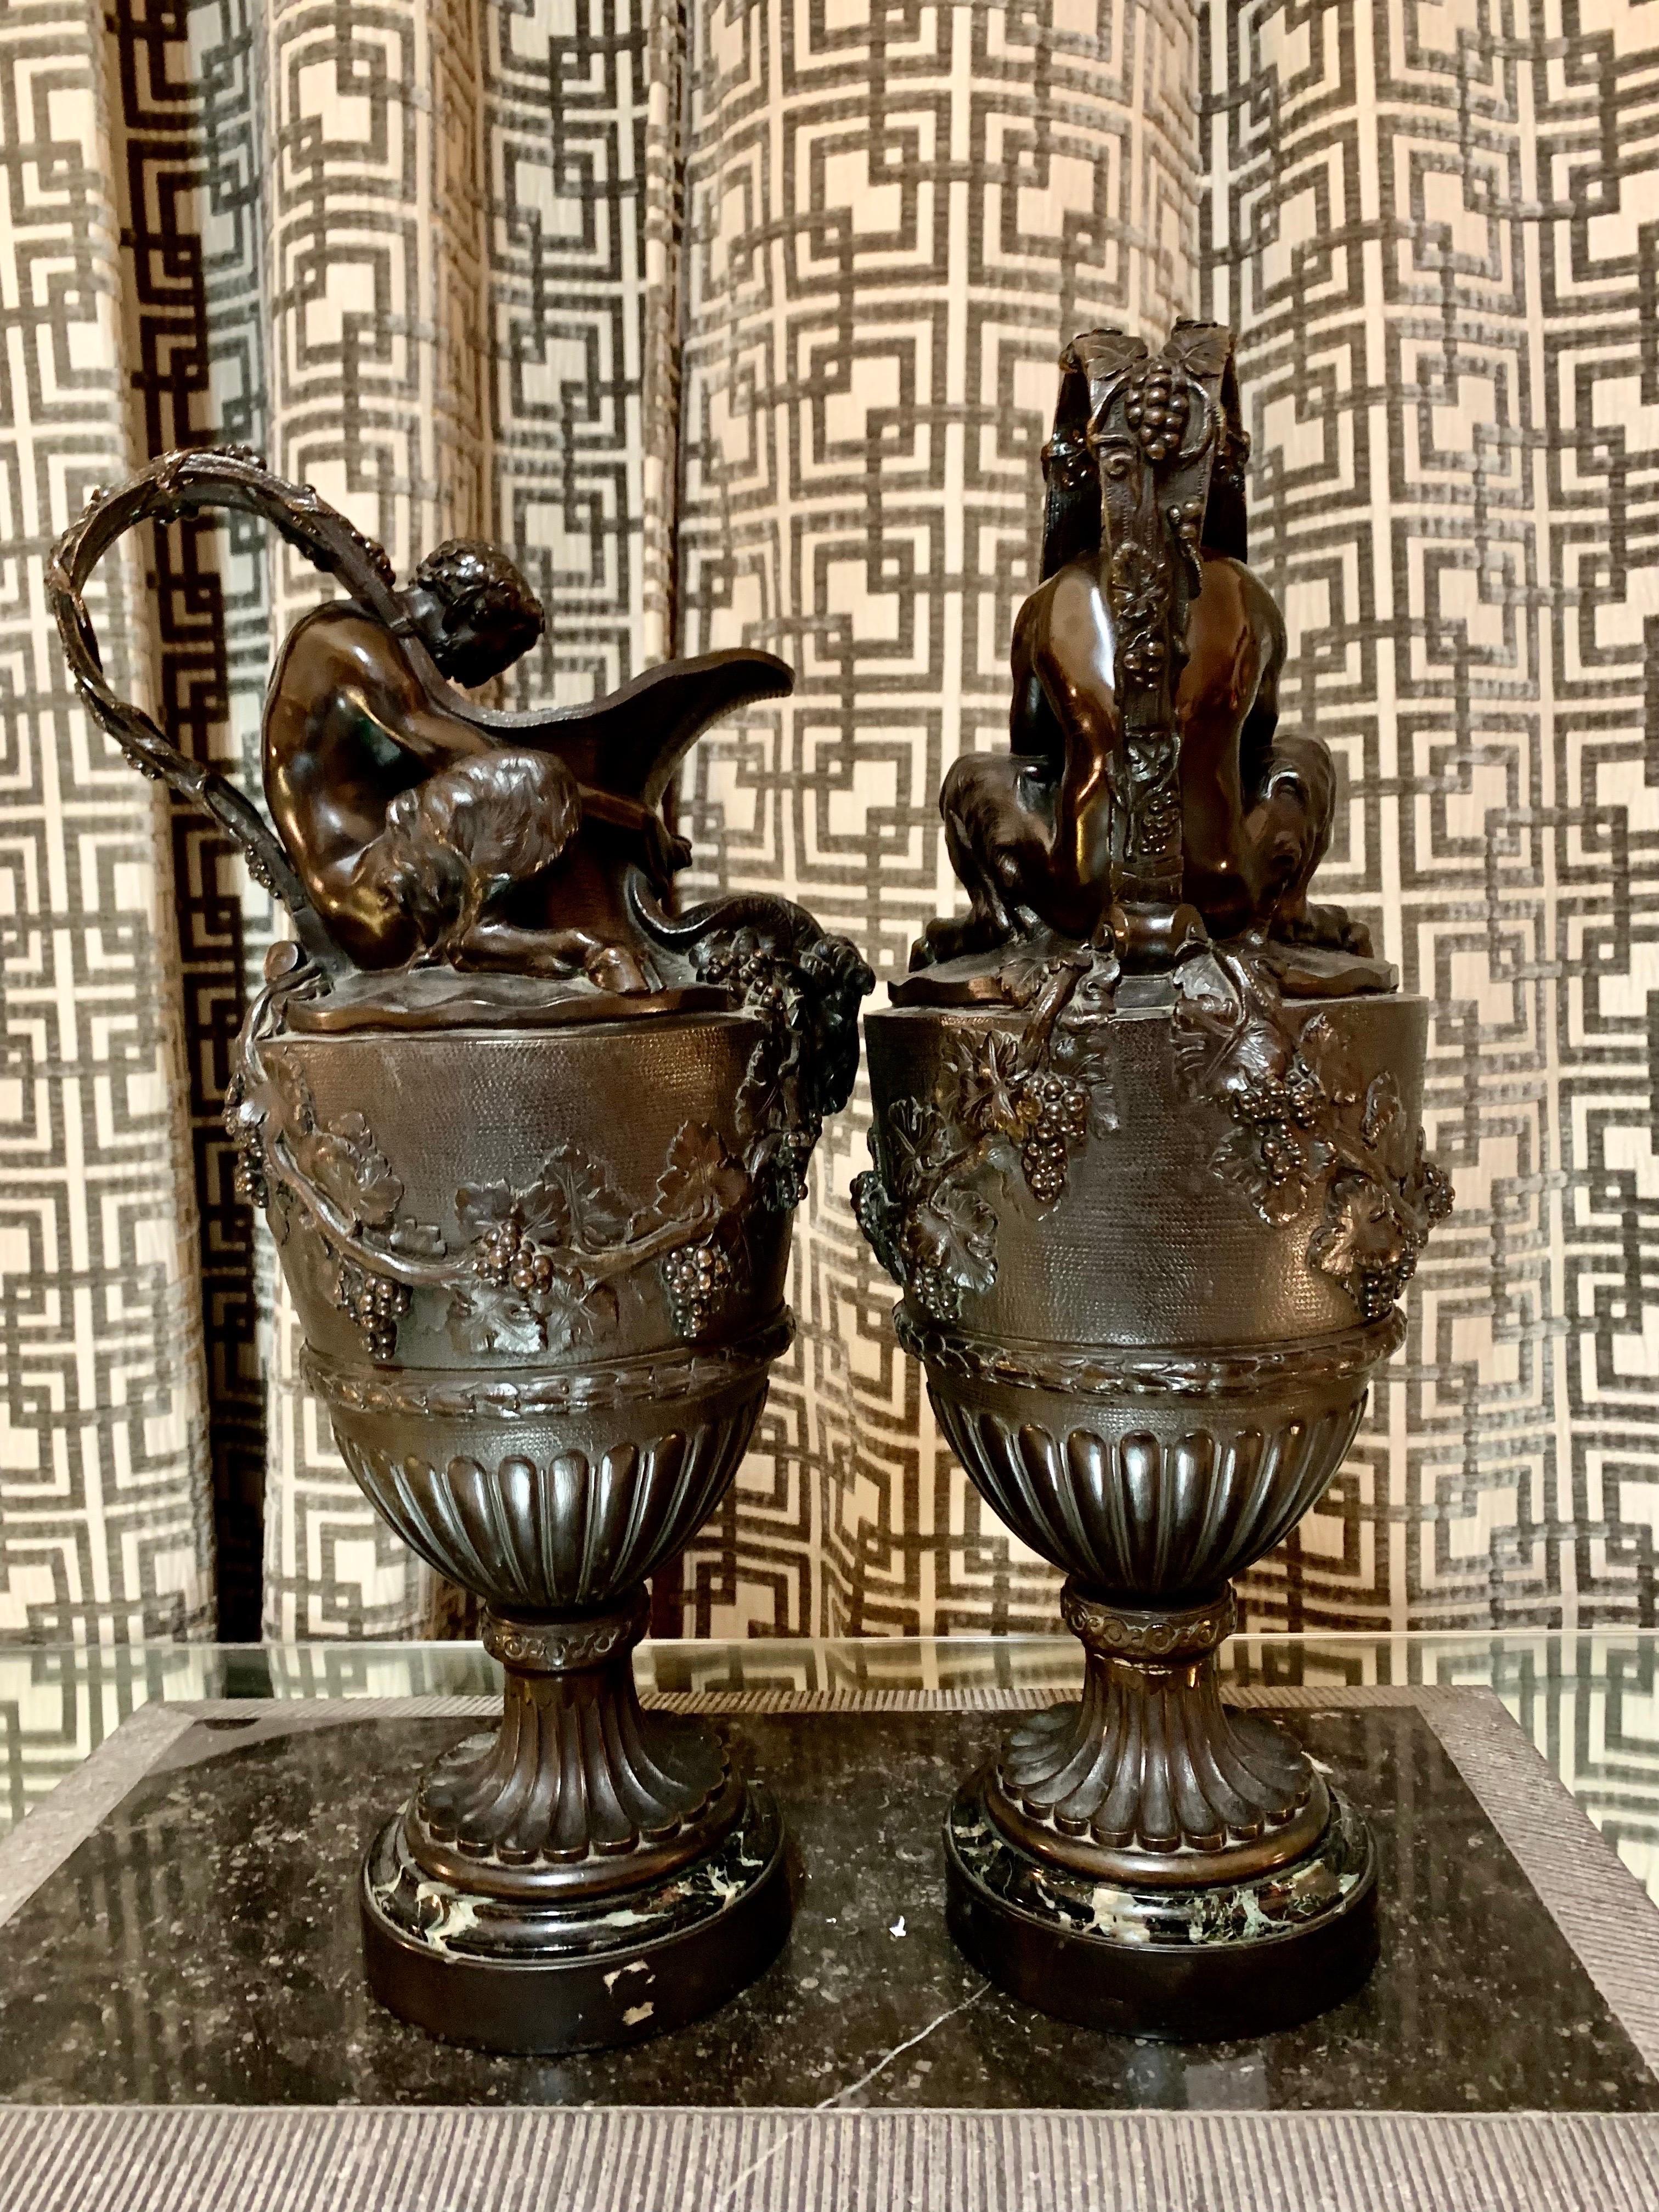 A pair of late 19th century French vases or urns, in the style of C.M.Clodion, in patinated bronze with a Belgian black marble base.
The vases are in the New Renaissance style, and in them two human figures are represented as two satyrs, which make